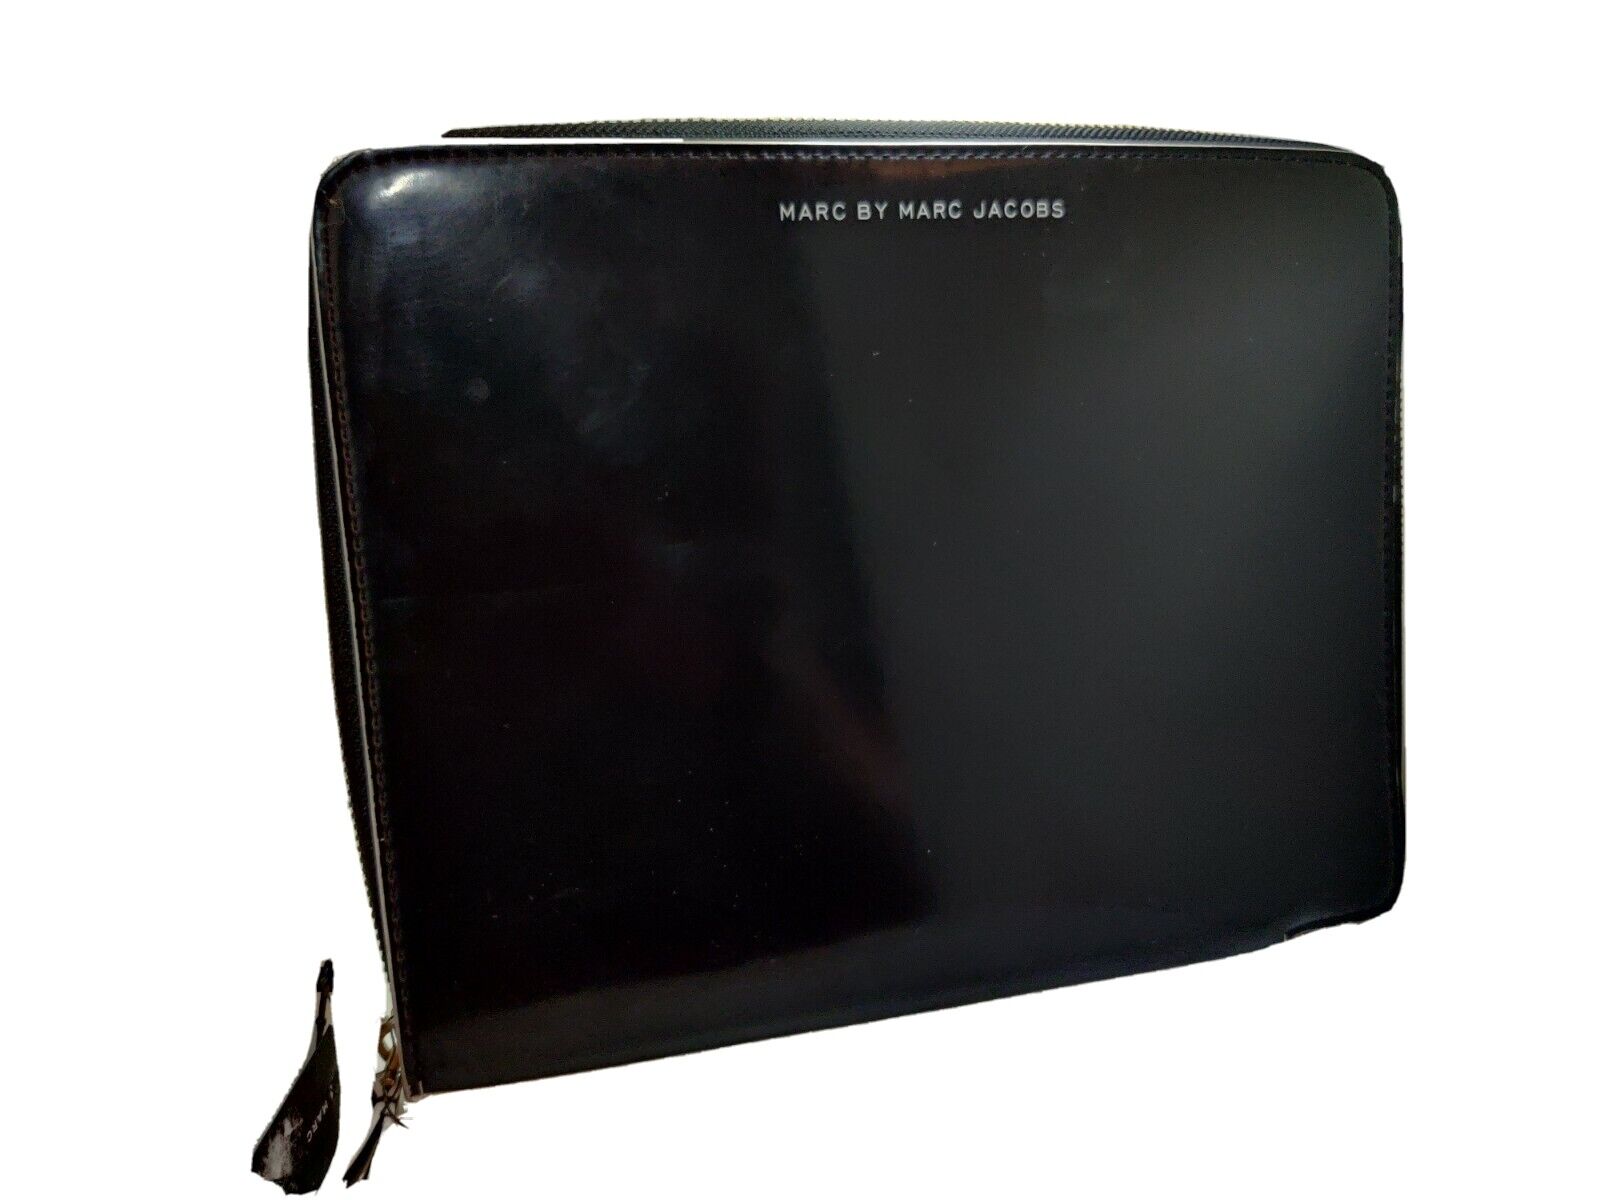 Marc by Marc Jacobs iPad case m6131053 with tag